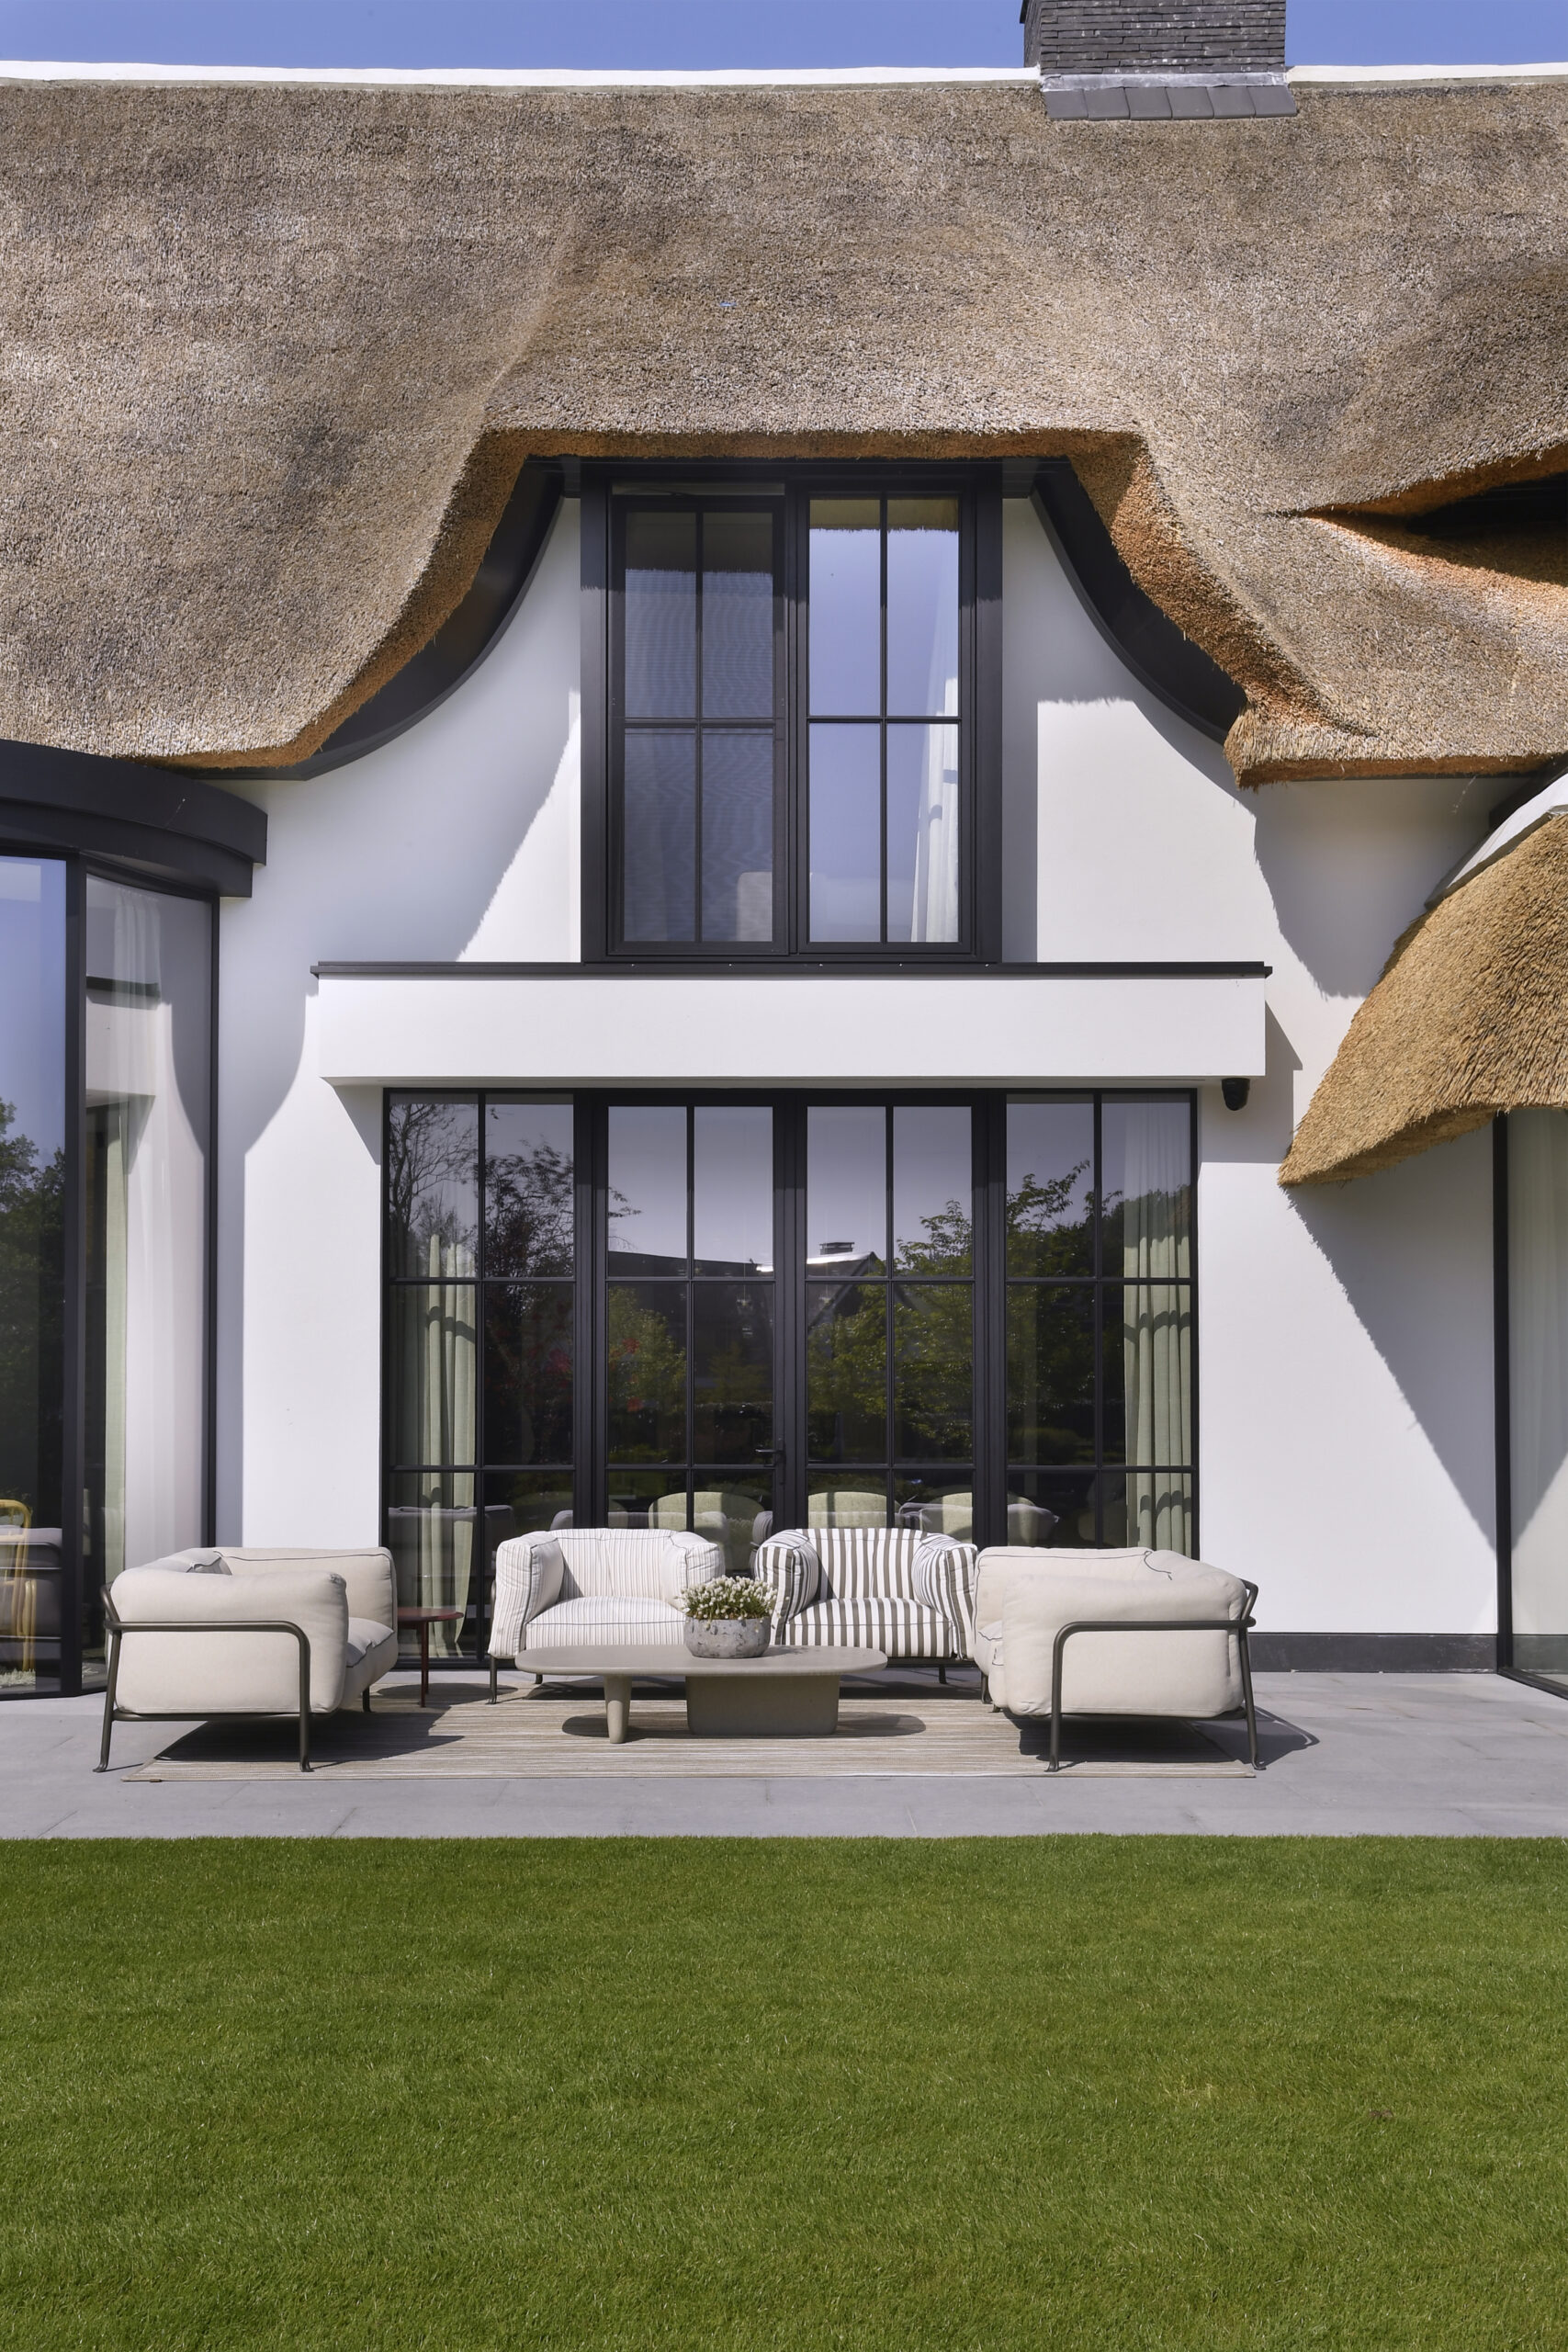 Modern house with thatched roof, large windows, and patio seating area.